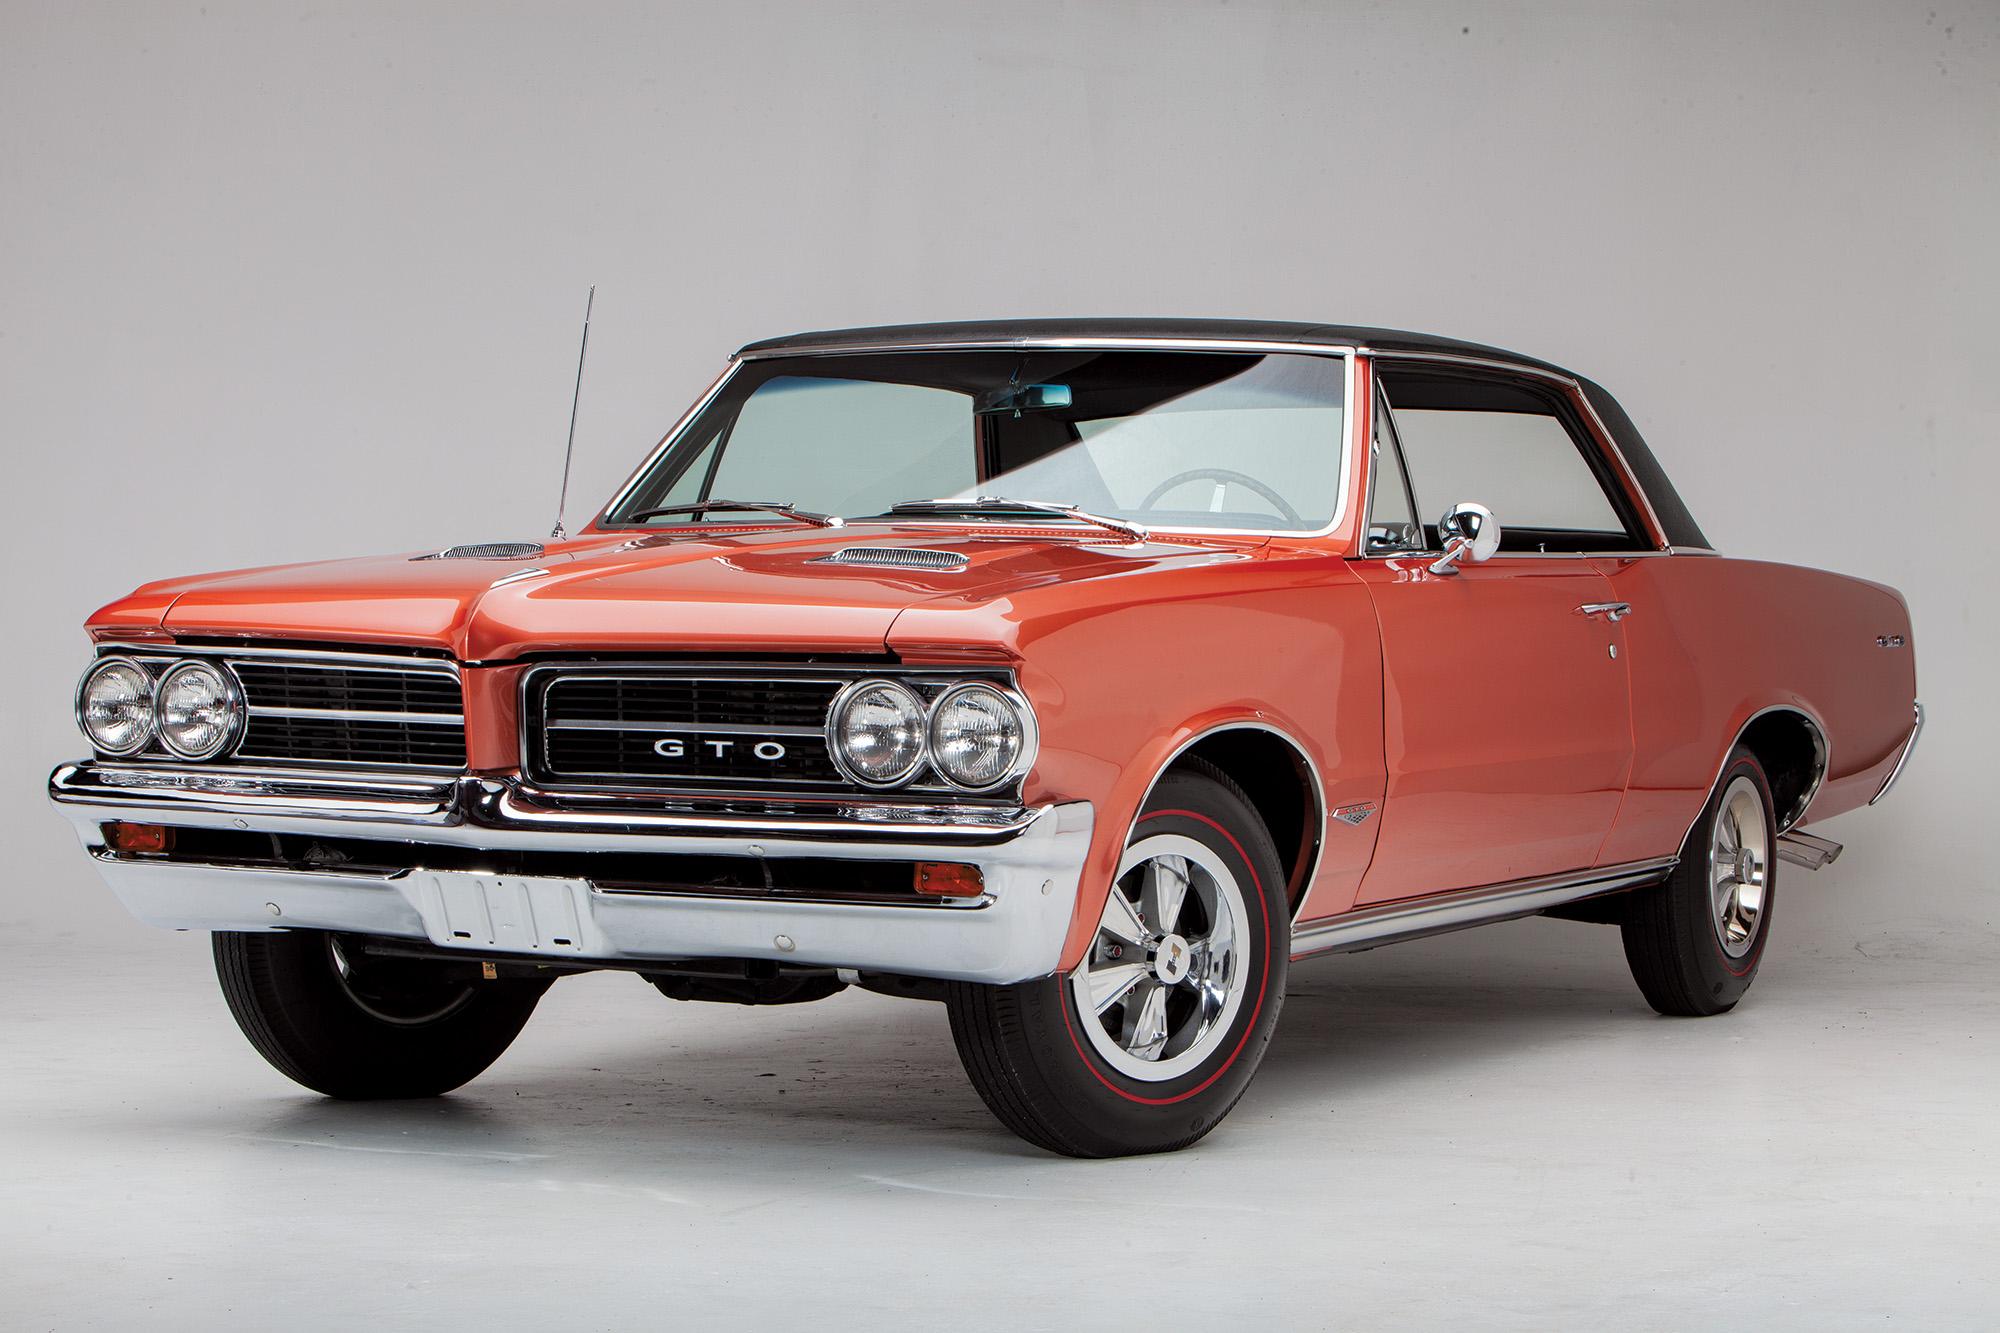 Buyer's Guide to the 1964 Pontiac GTO